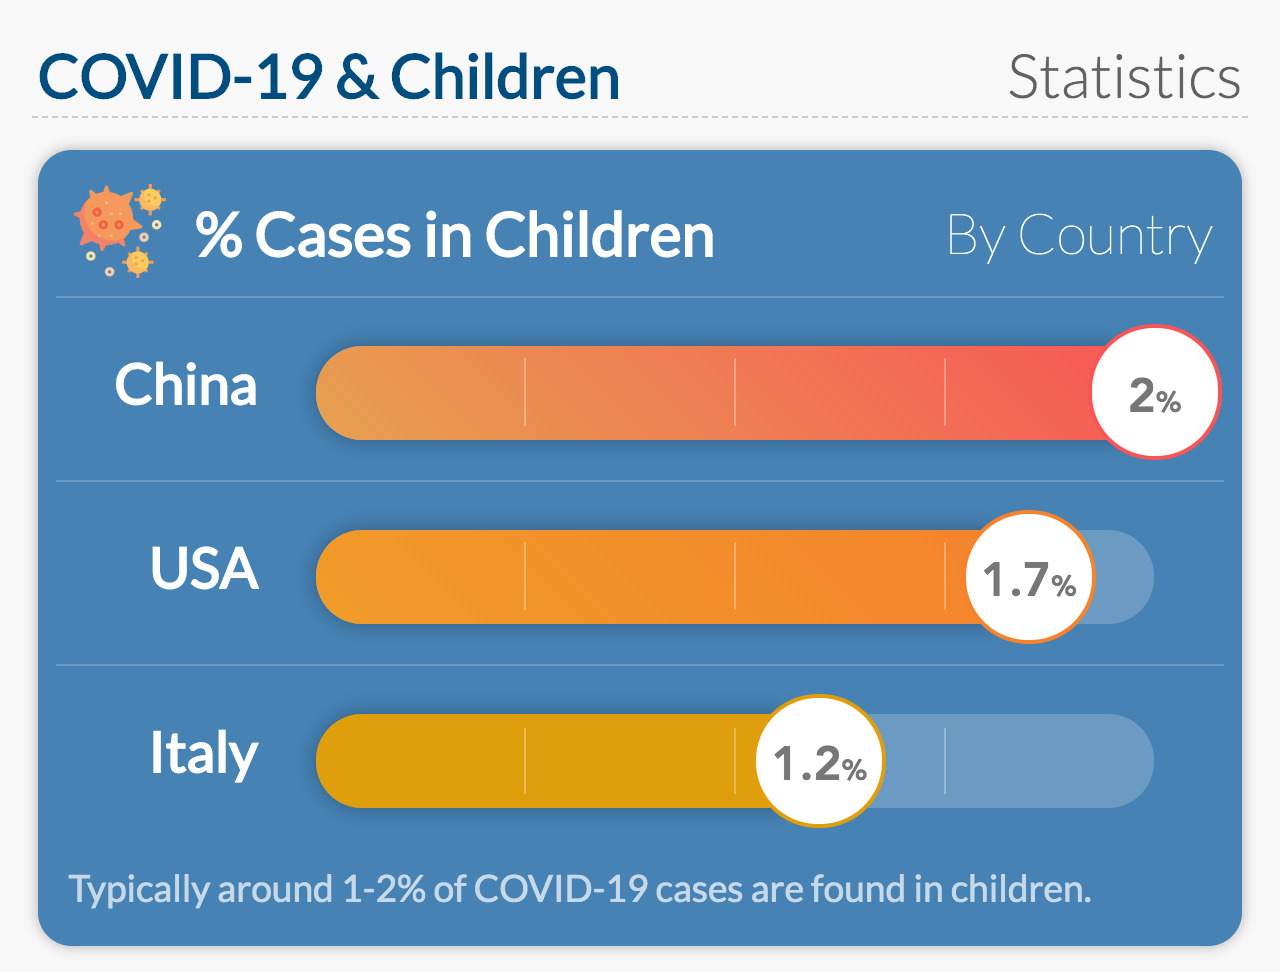 Typically around 1-2% of COVID-19 cases are found in children.